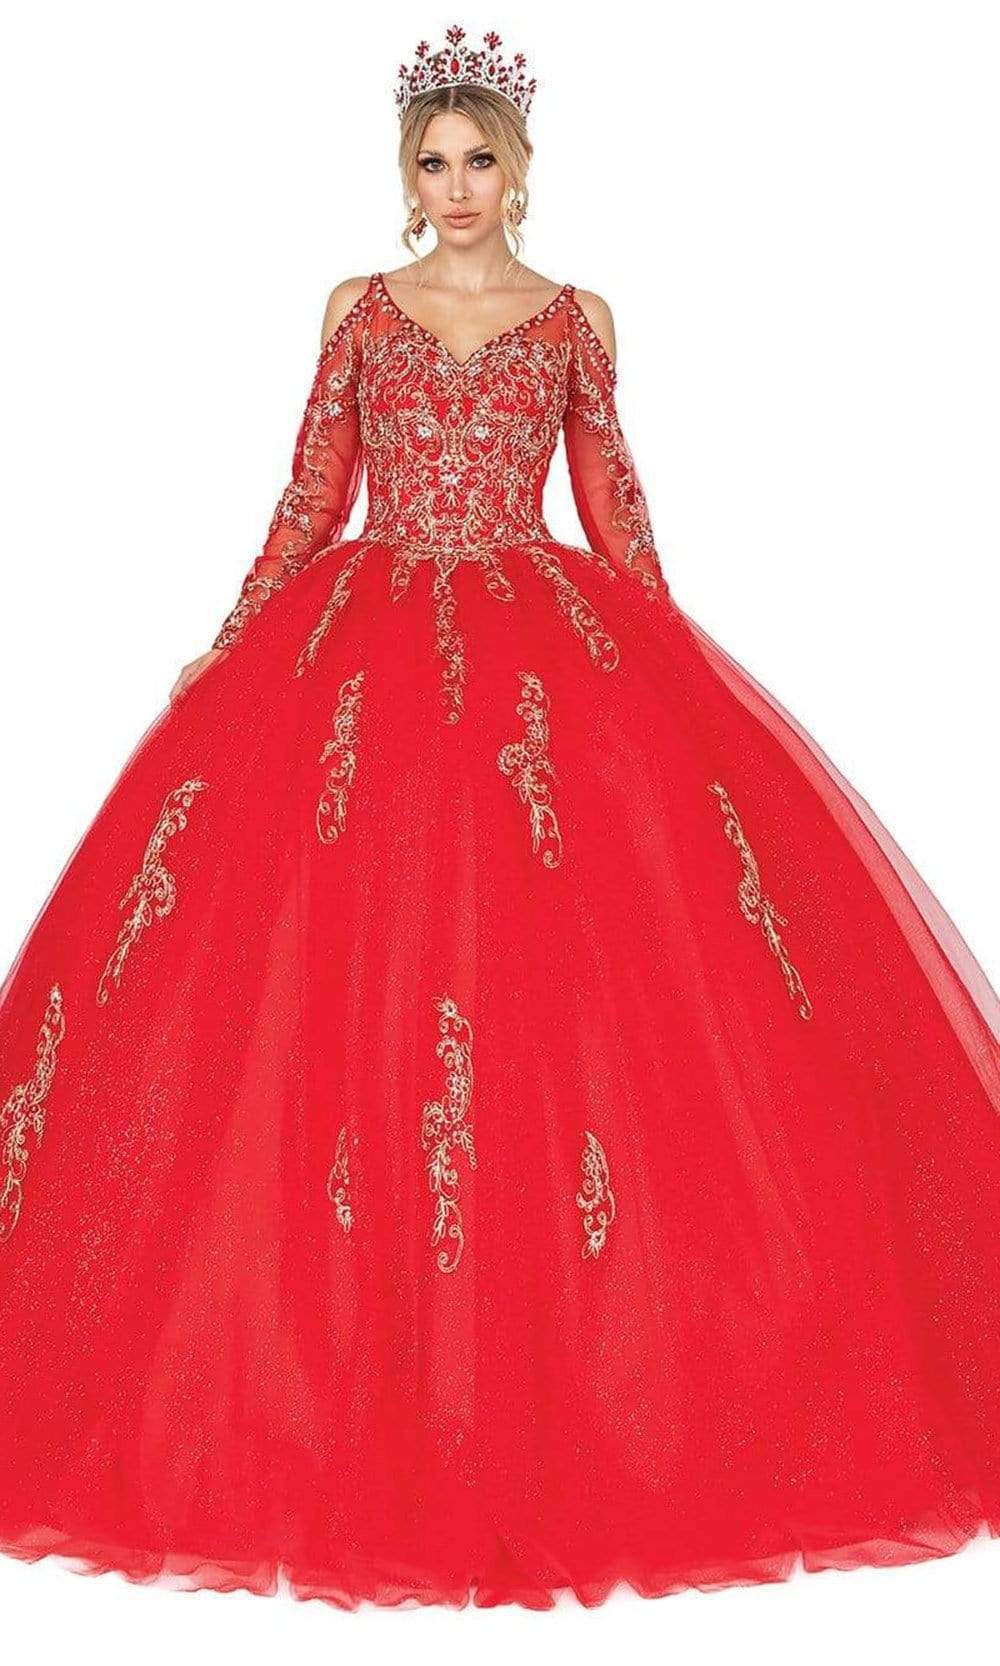 Dancing Queen - 1563 Beaded Lace Appliqued Glitter Tulle Ballgown Quinceanera Dresses XS / Red